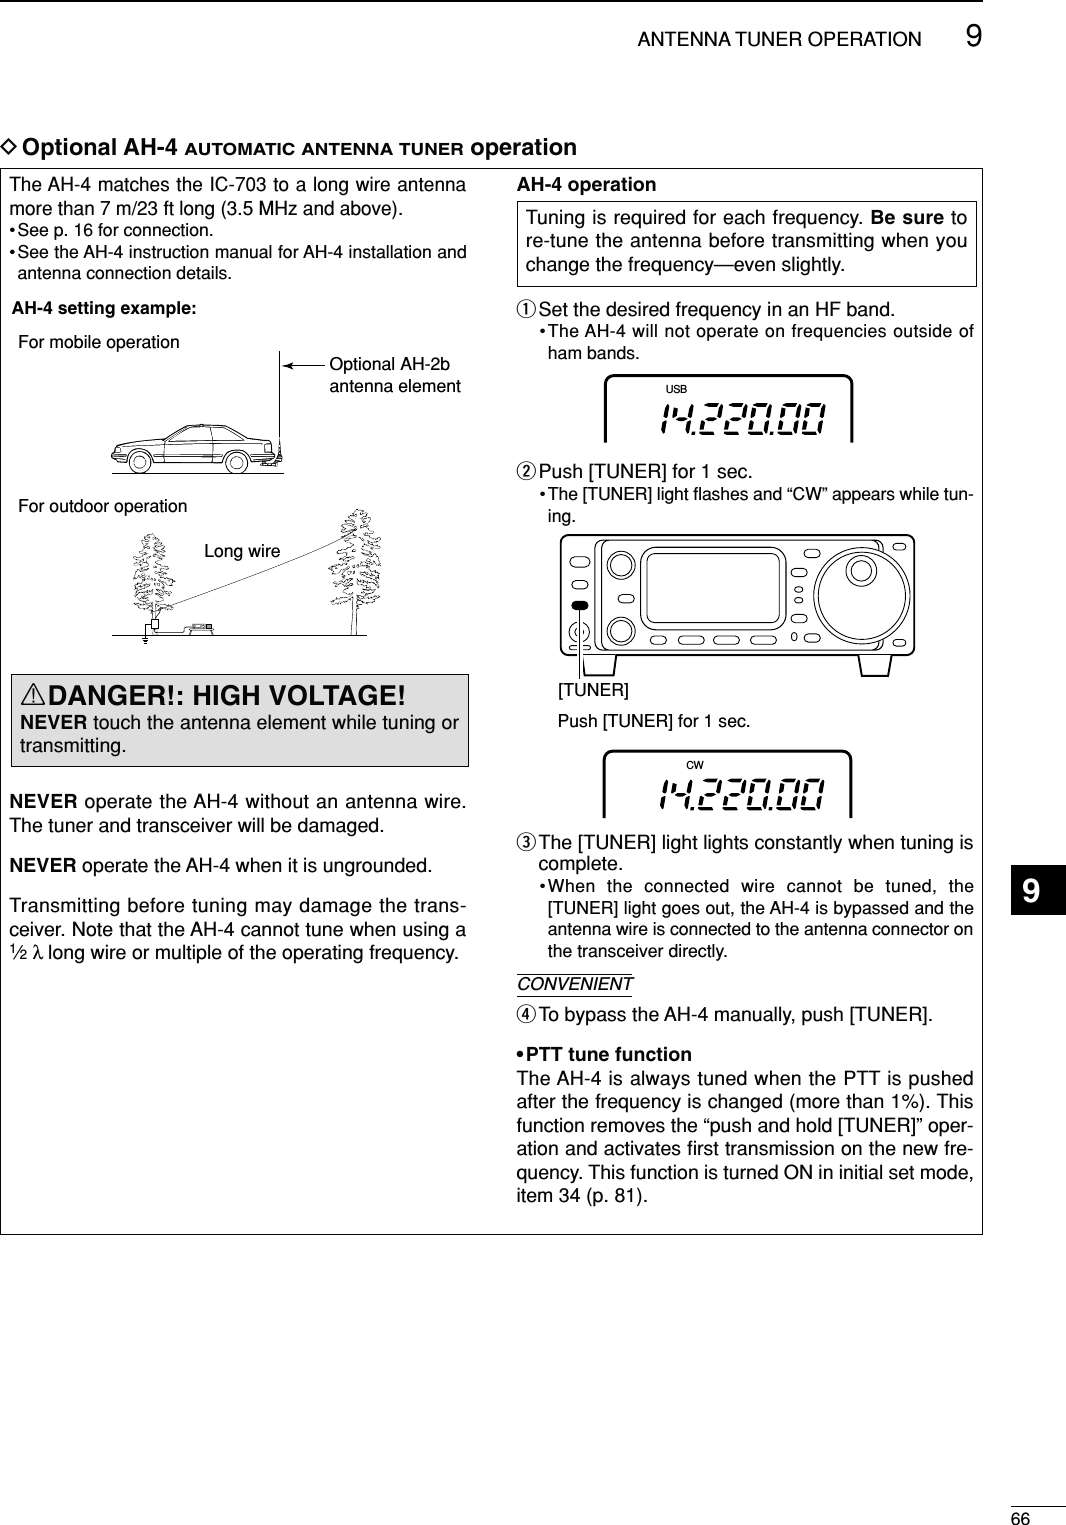 669ANTENNA TUNER OPERATIONThe AH-4 matches the IC-703 to a long wire antennamore than 7 m/23 ft long (3.5 MHz and above).• See p. 16 for connection.•See the AH-4 instruction manual for AH-4 installation andantenna connection details.NEVER operate the AH-4 without an antenna wire.The tuner and transceiver will be damaged.NEVER operate the AH-4 when it is ungrounded.Transmitting before tuning may damage the trans-ceiver. Note that the AH-4 cannot tune when using a1⁄2λ long wire or multiple of the operating frequency.AH-4 operationqSet the desired frequency in an HF band.•The AH-4 will not operate on frequencies outside ofham bands.wPush [TUNER] for 1 sec.•The [TUNER] light ﬂashes and “CW” appears while tun-ing.eThe [TUNER] light lights constantly when tuning iscomplete.•When the connected wire cannot be tuned, the[TUNER] light goes out, the AH-4 is bypassed and theantenna wire is connected to the antenna connector onthe transceiver directly.rTo bypass the AH-4 manually, push [TUNER].• PTT tune functionThe AH-4 is always tuned when the PTT is pushedafter the frequency is changed (more than 1%). Thisfunction removes the “push and hold [TUNER]” oper-ation and activates ﬁrst transmission on the new fre-quency. This function is turned ON in initial set mode,item 34 (p. 81).CW[TUNER]Push [TUNER] for 1 sec.USBAH-4 setting example:For mobile operationFor outdoor operationLong wireOptional AH-2bantenna elementDOptional AH-4 AUTOMATIC ANTENNA TUNERoperationRDANGER!: HIGH VOLTAGE!NEVER touch the antenna element while tuning ortransmitting.Tuning is required for each frequency. Be sure tore-tune the antenna before transmitting when youchange the frequency—even slightly.CONVENIENT9